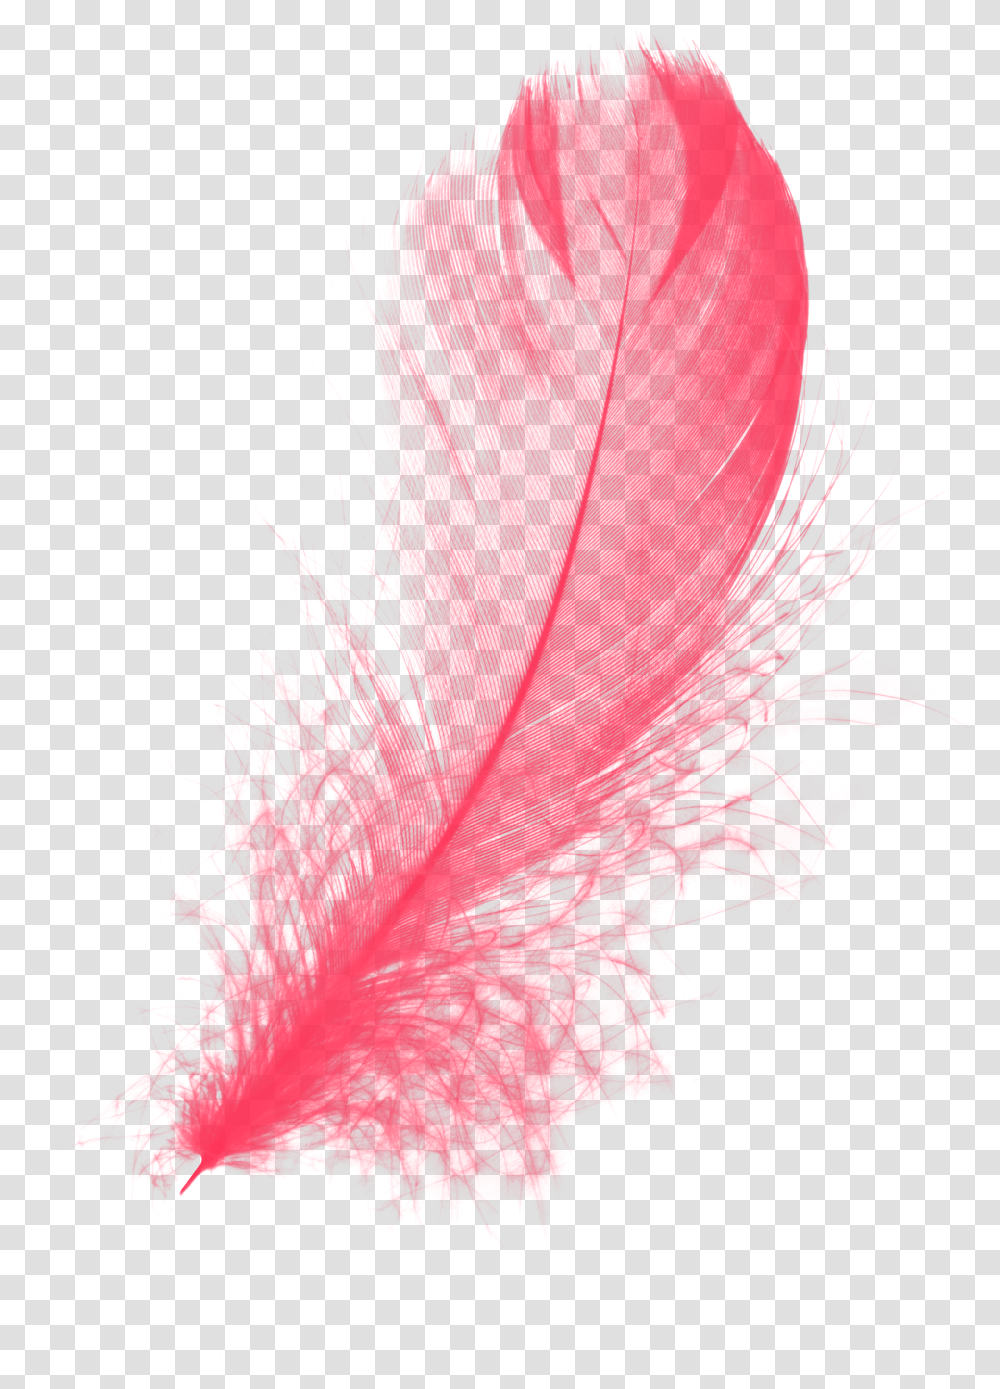 Download Red Feather Background, Clothing, Apparel, Feather Boa, Scarf Transparent Png